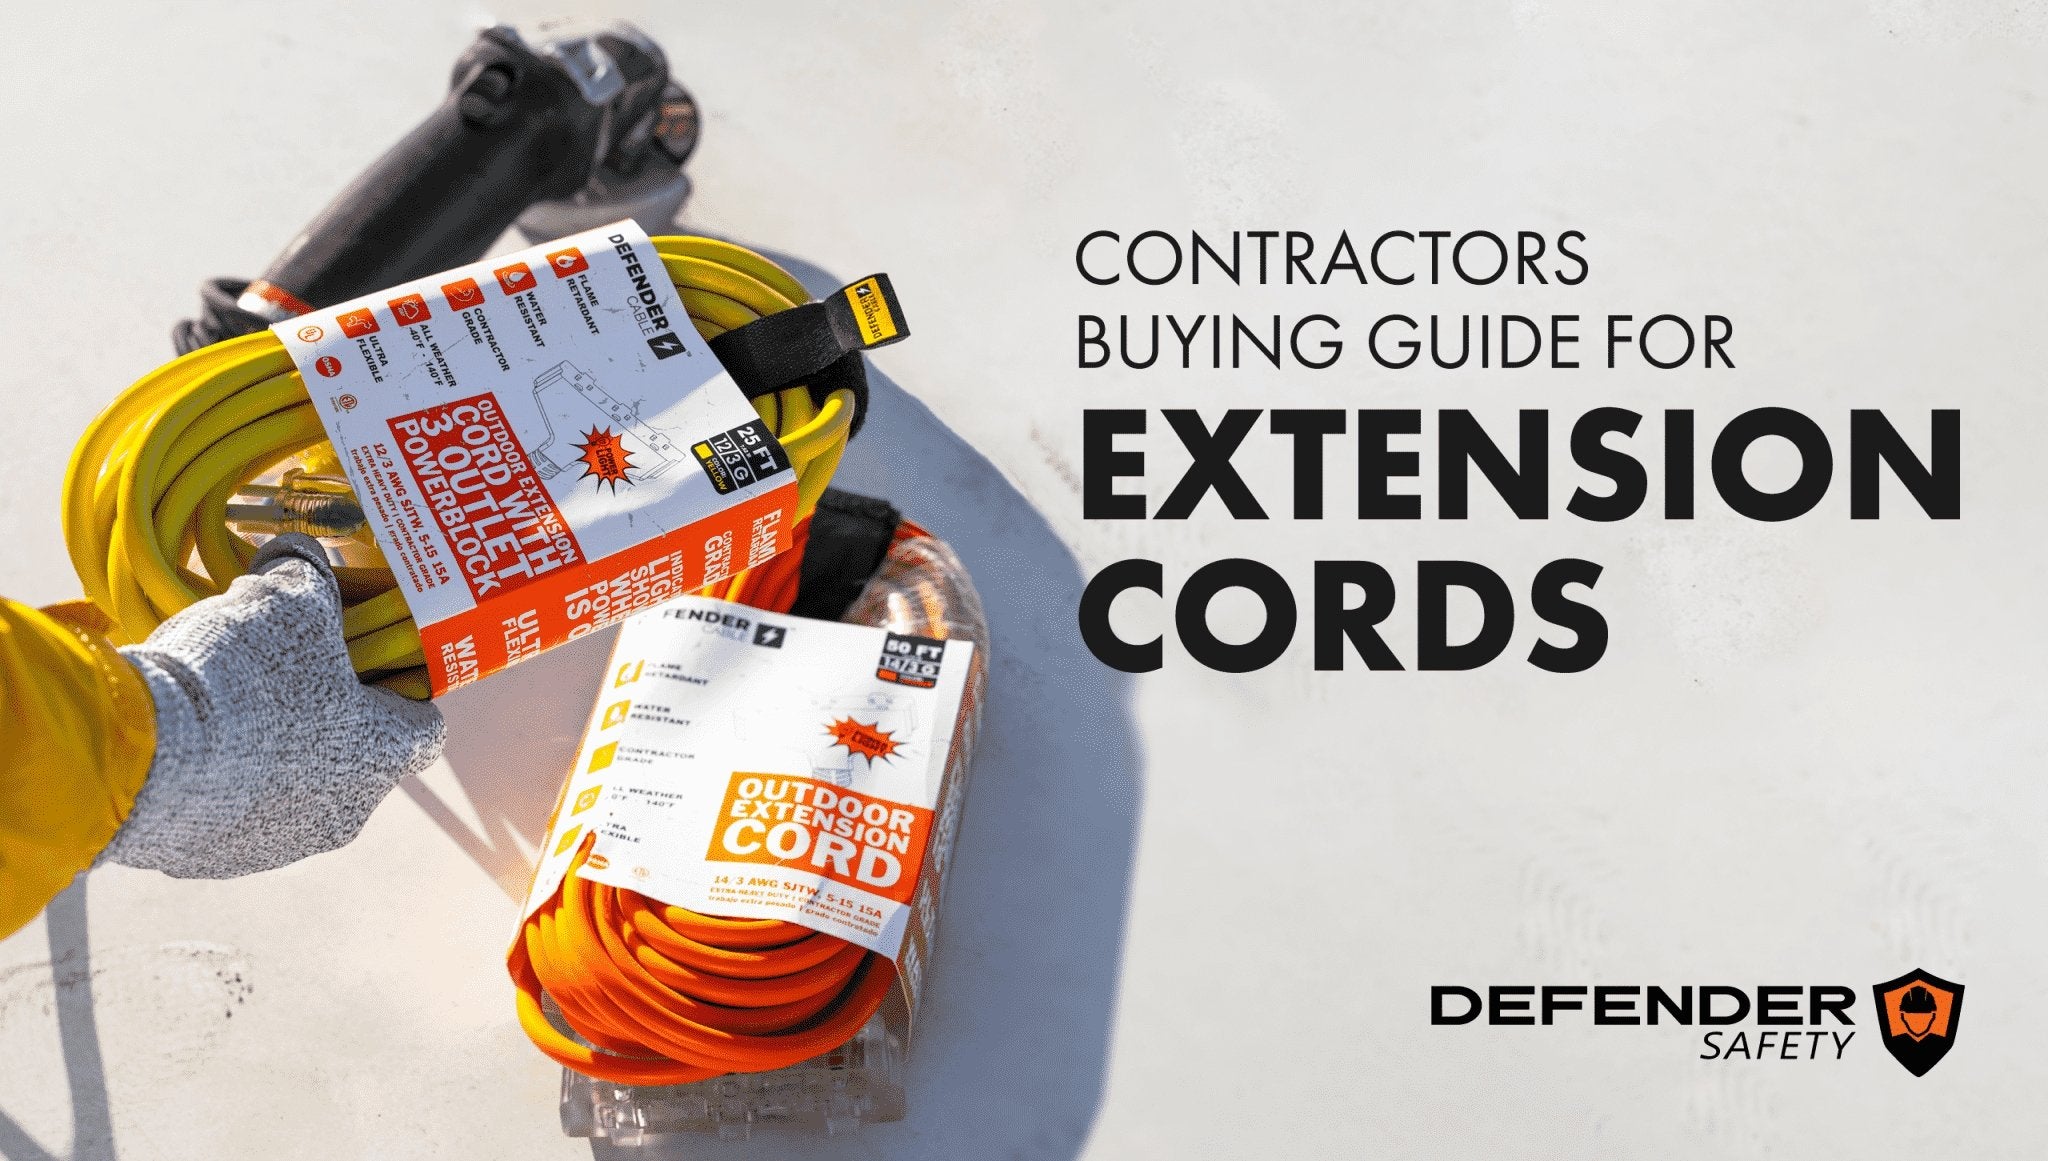 Contractors Buying Guide for Extension Cords - Defender Safety